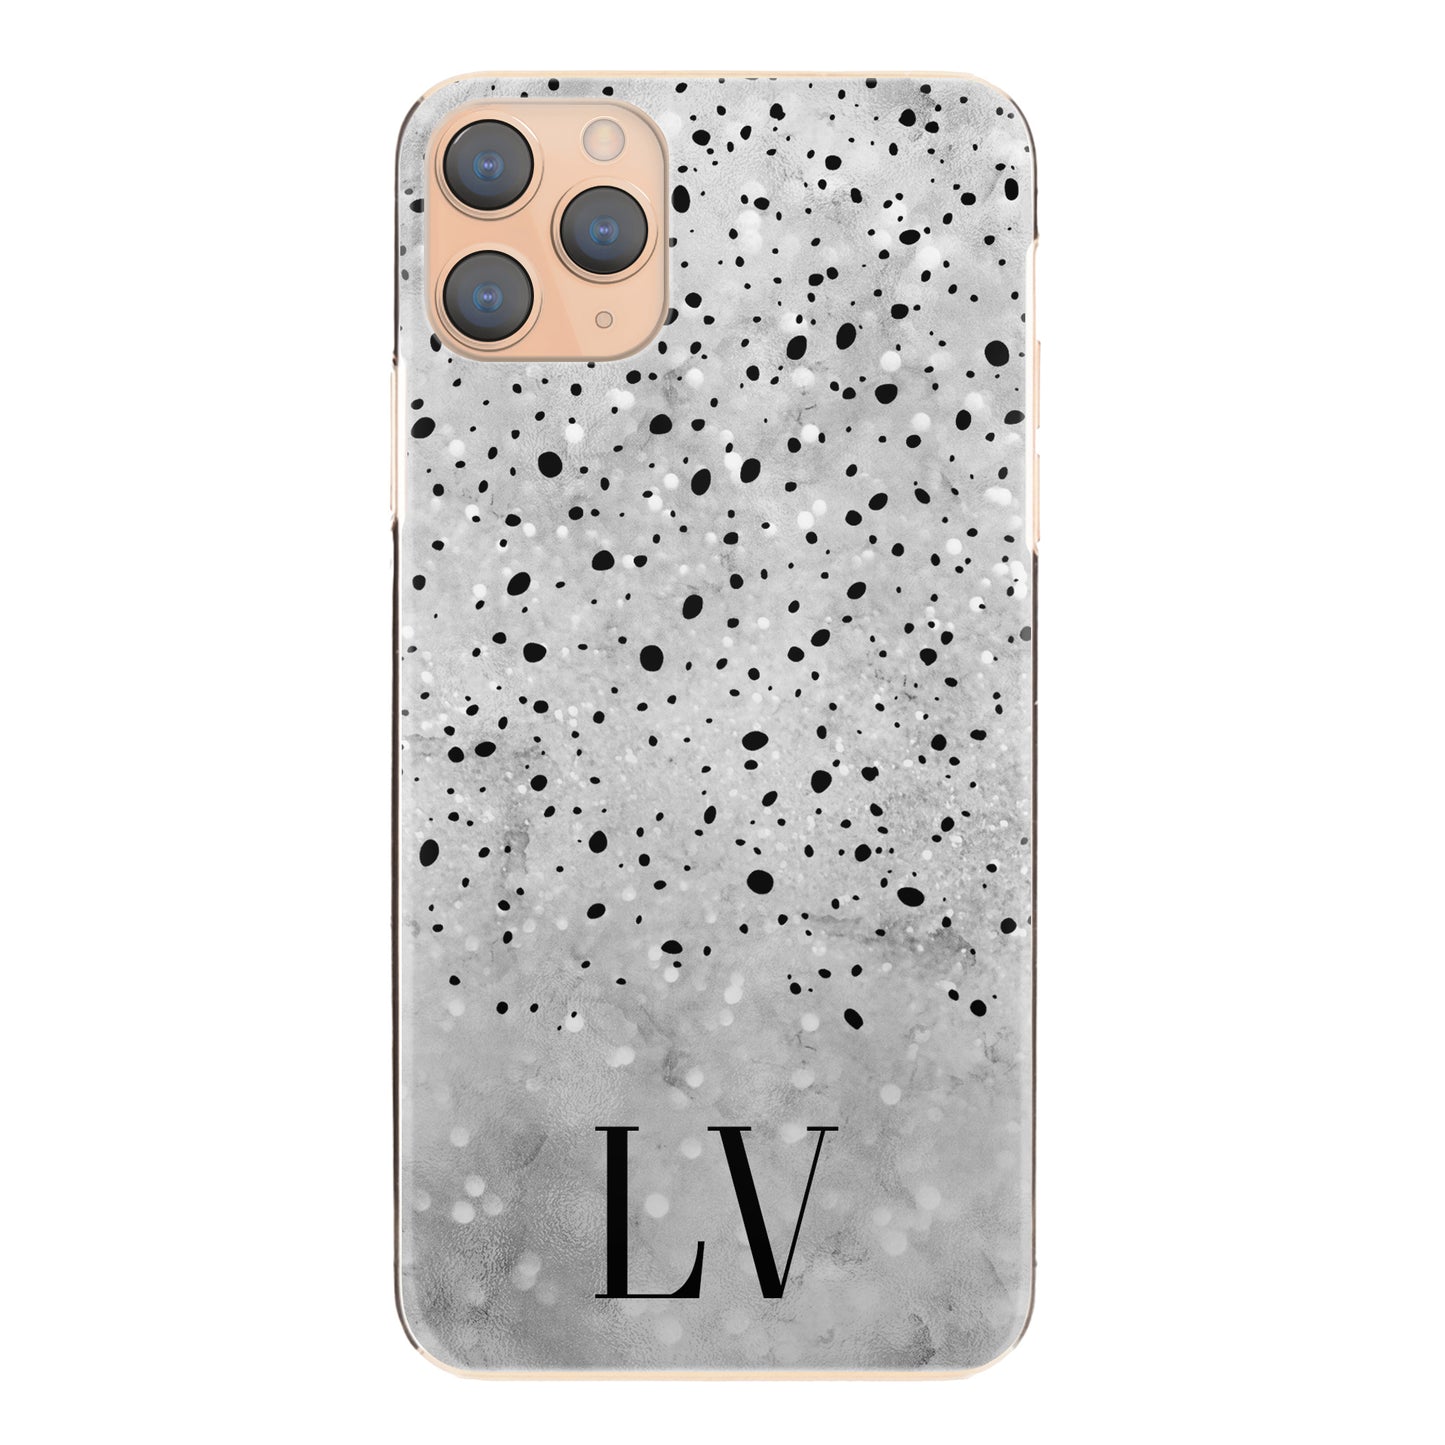 Personalised Huawei Phone Hard Case with Classy Initials on Textured Grey and Black Dots